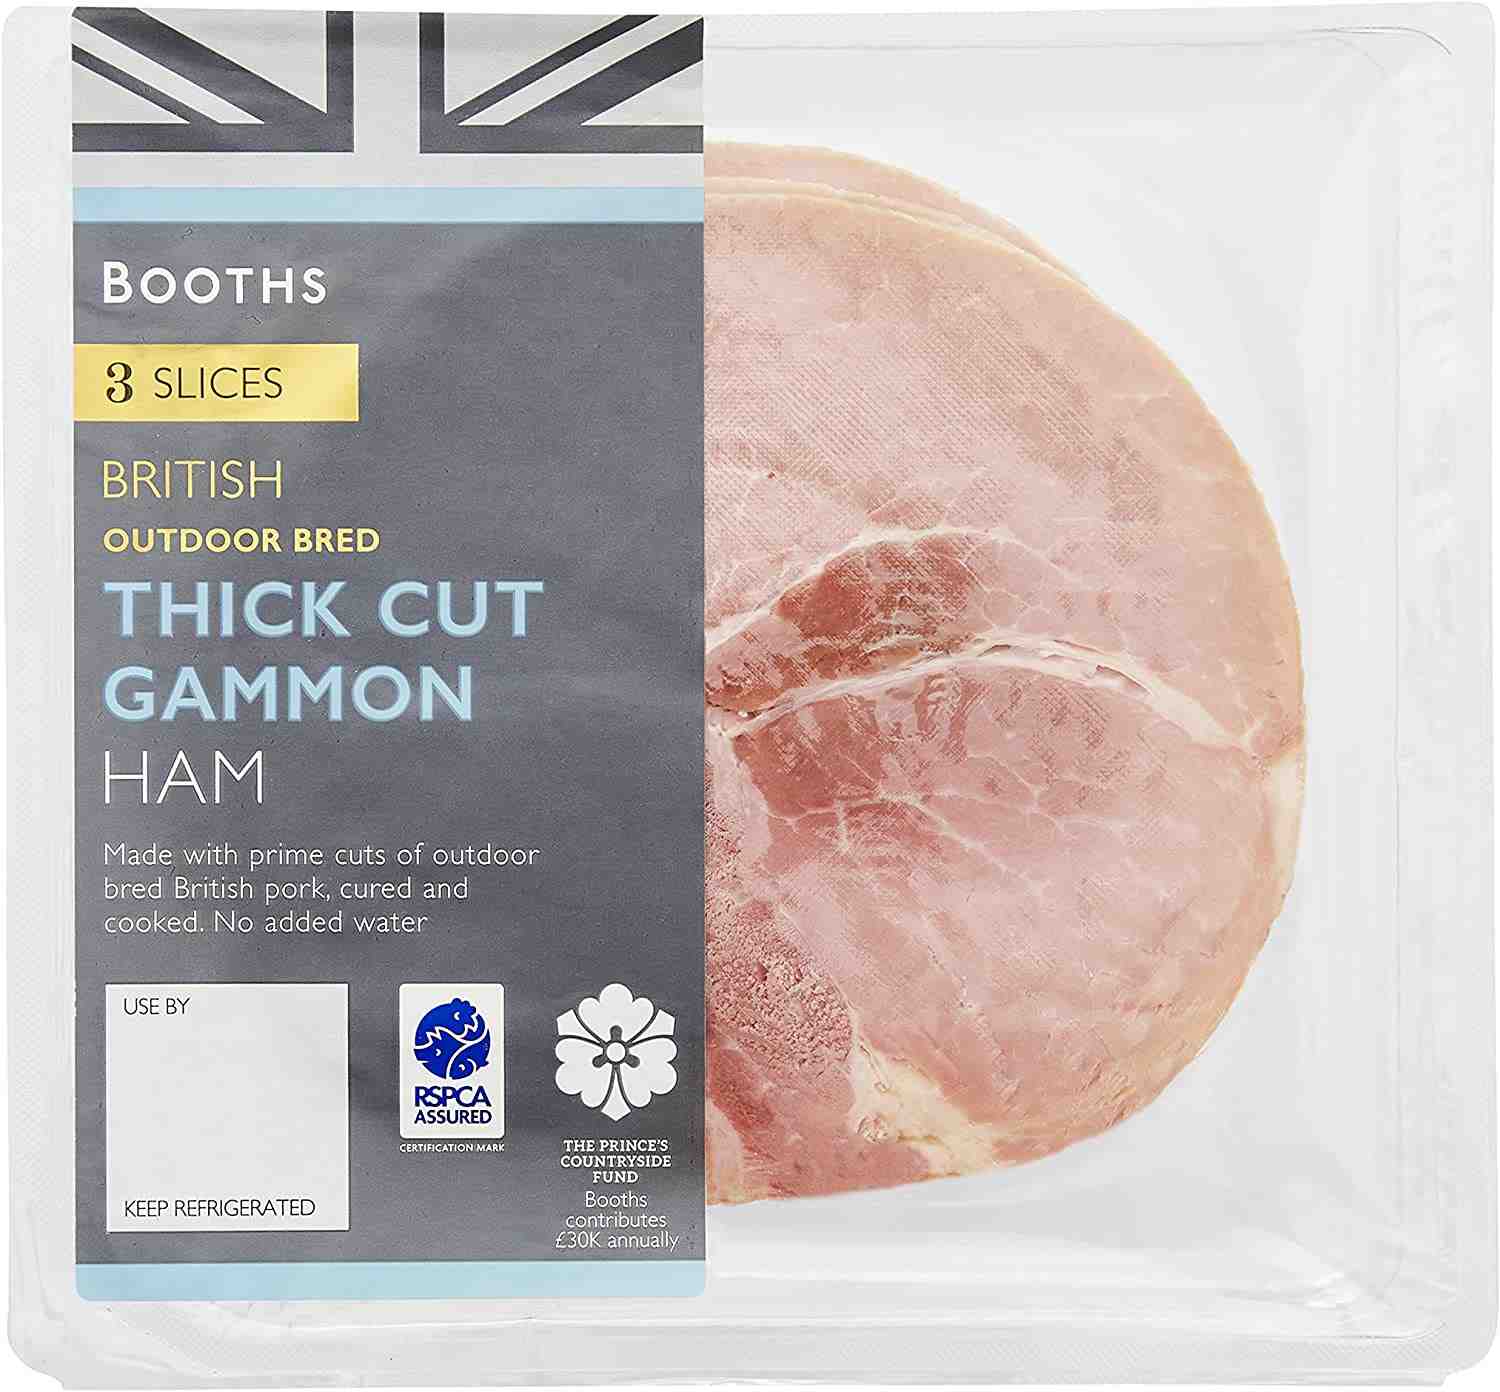 How do you remove salt from gammon before cooking?